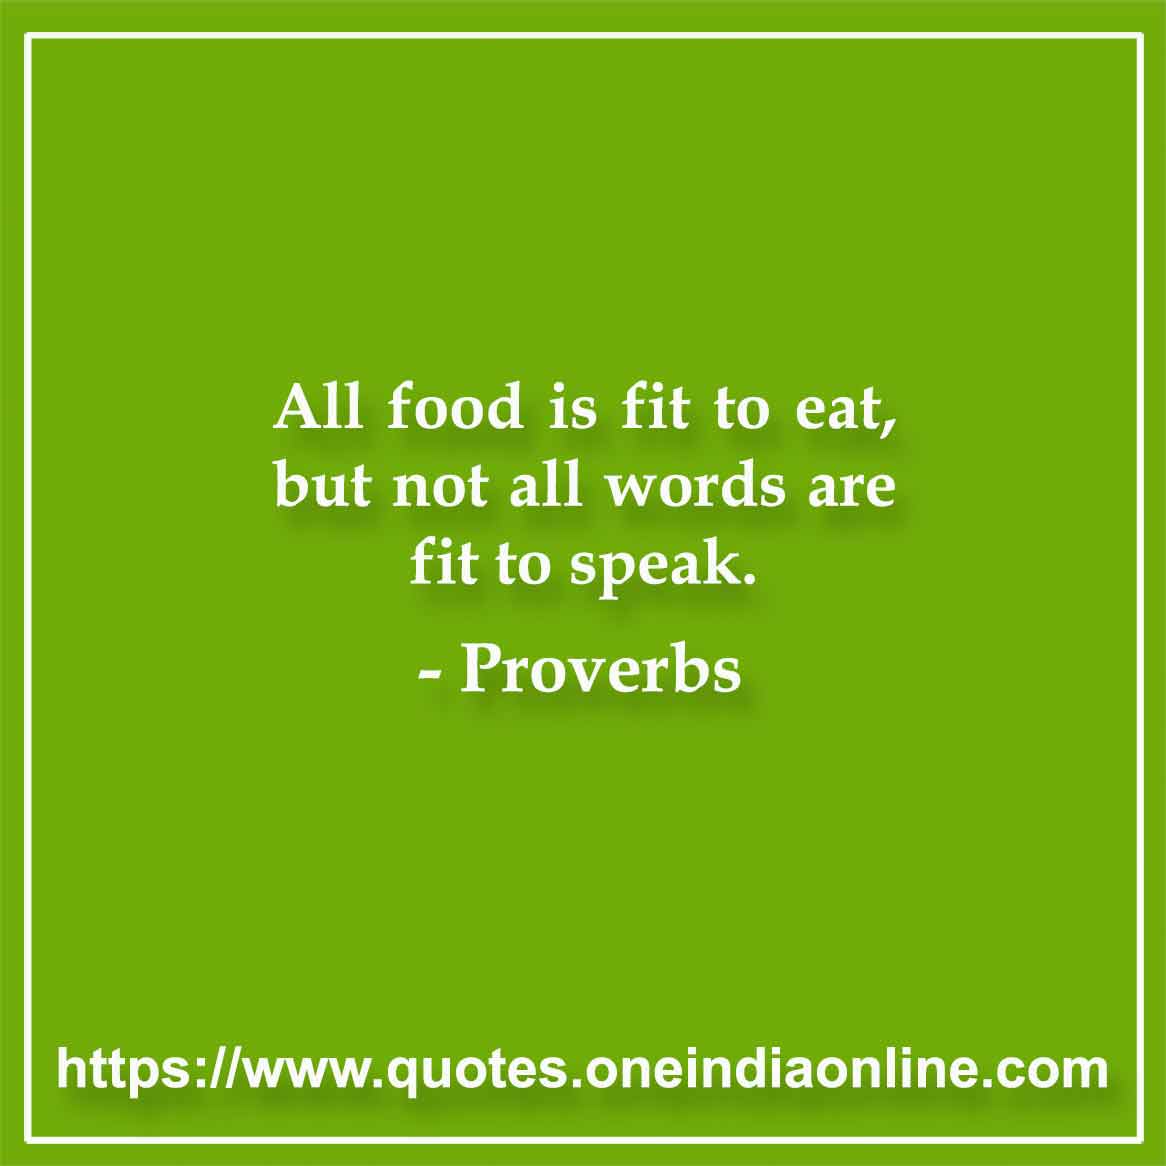 All food is fit to eat, but not all words are fit to speak.